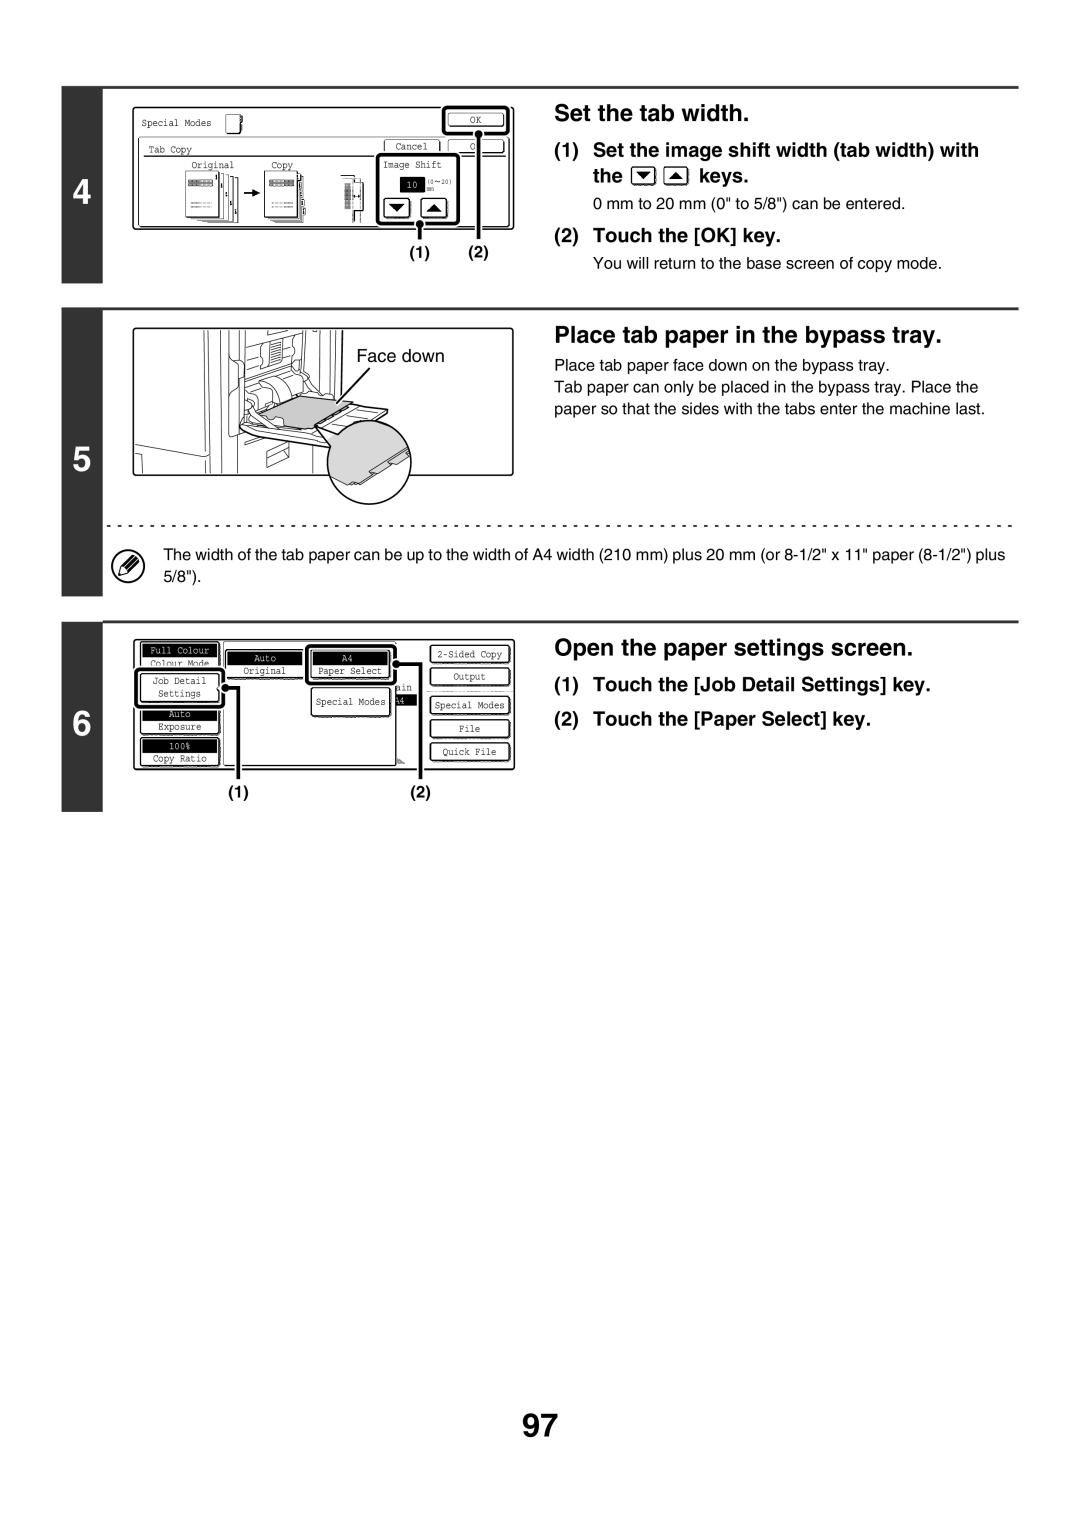 Sharp MX-2300G manual Set the tab width, Place tab paper in the bypass tray, Set the image shift width tab width with, keys 